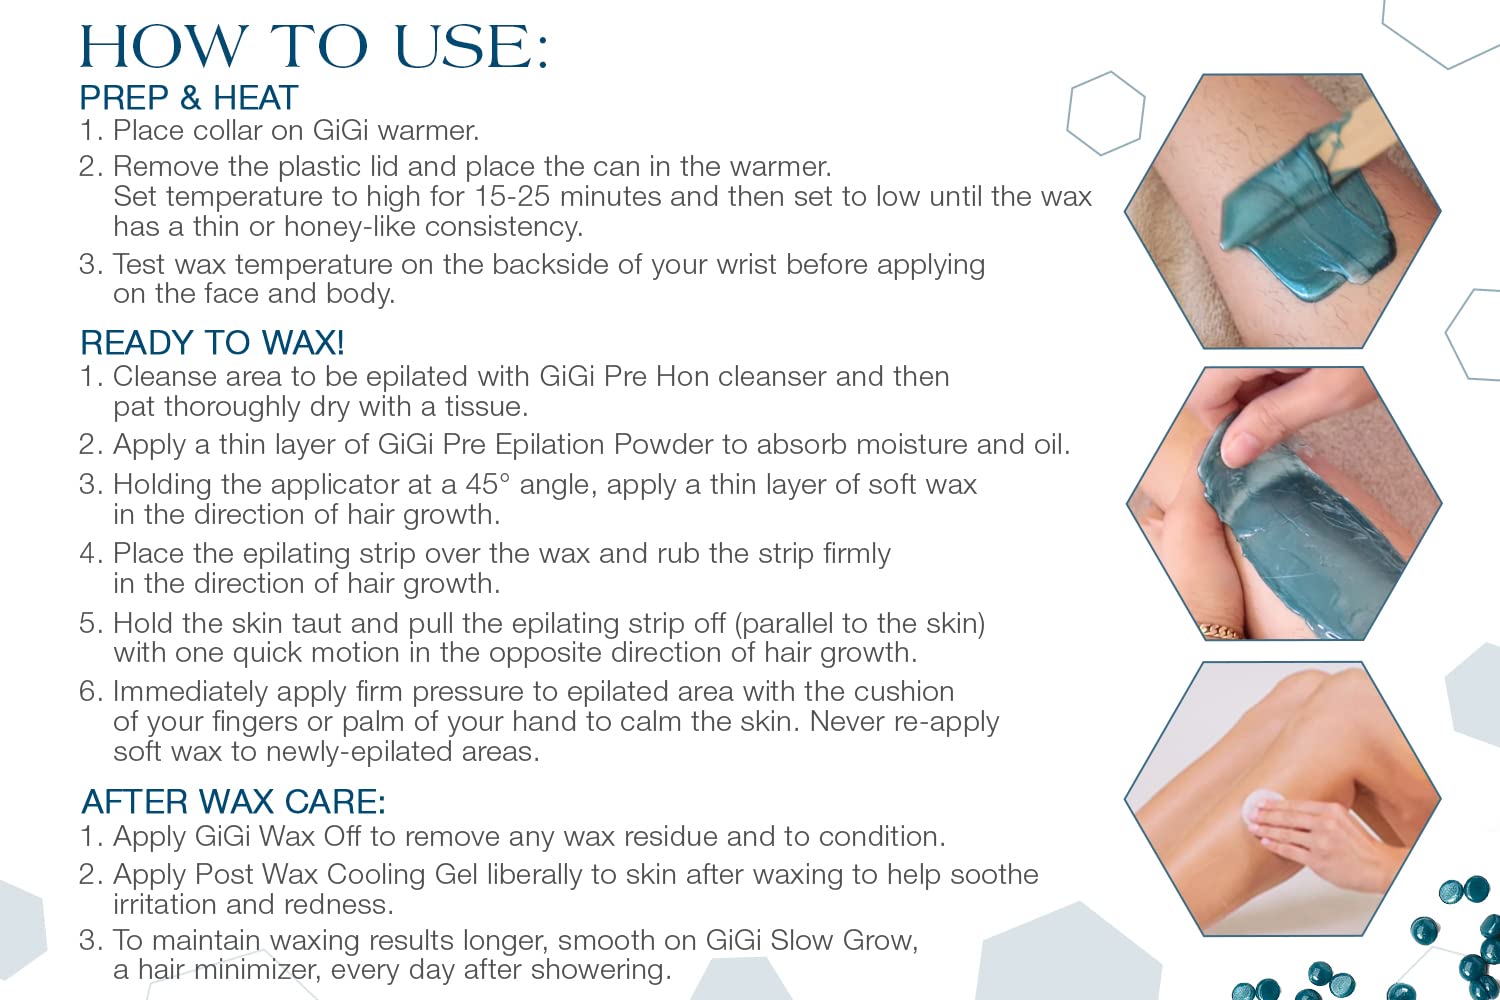 GiGi Hard Wax Beads, Soothing Azulene Hair Removal Wax for Sensitive Skin, 32 oz : Beauty & Personal Care